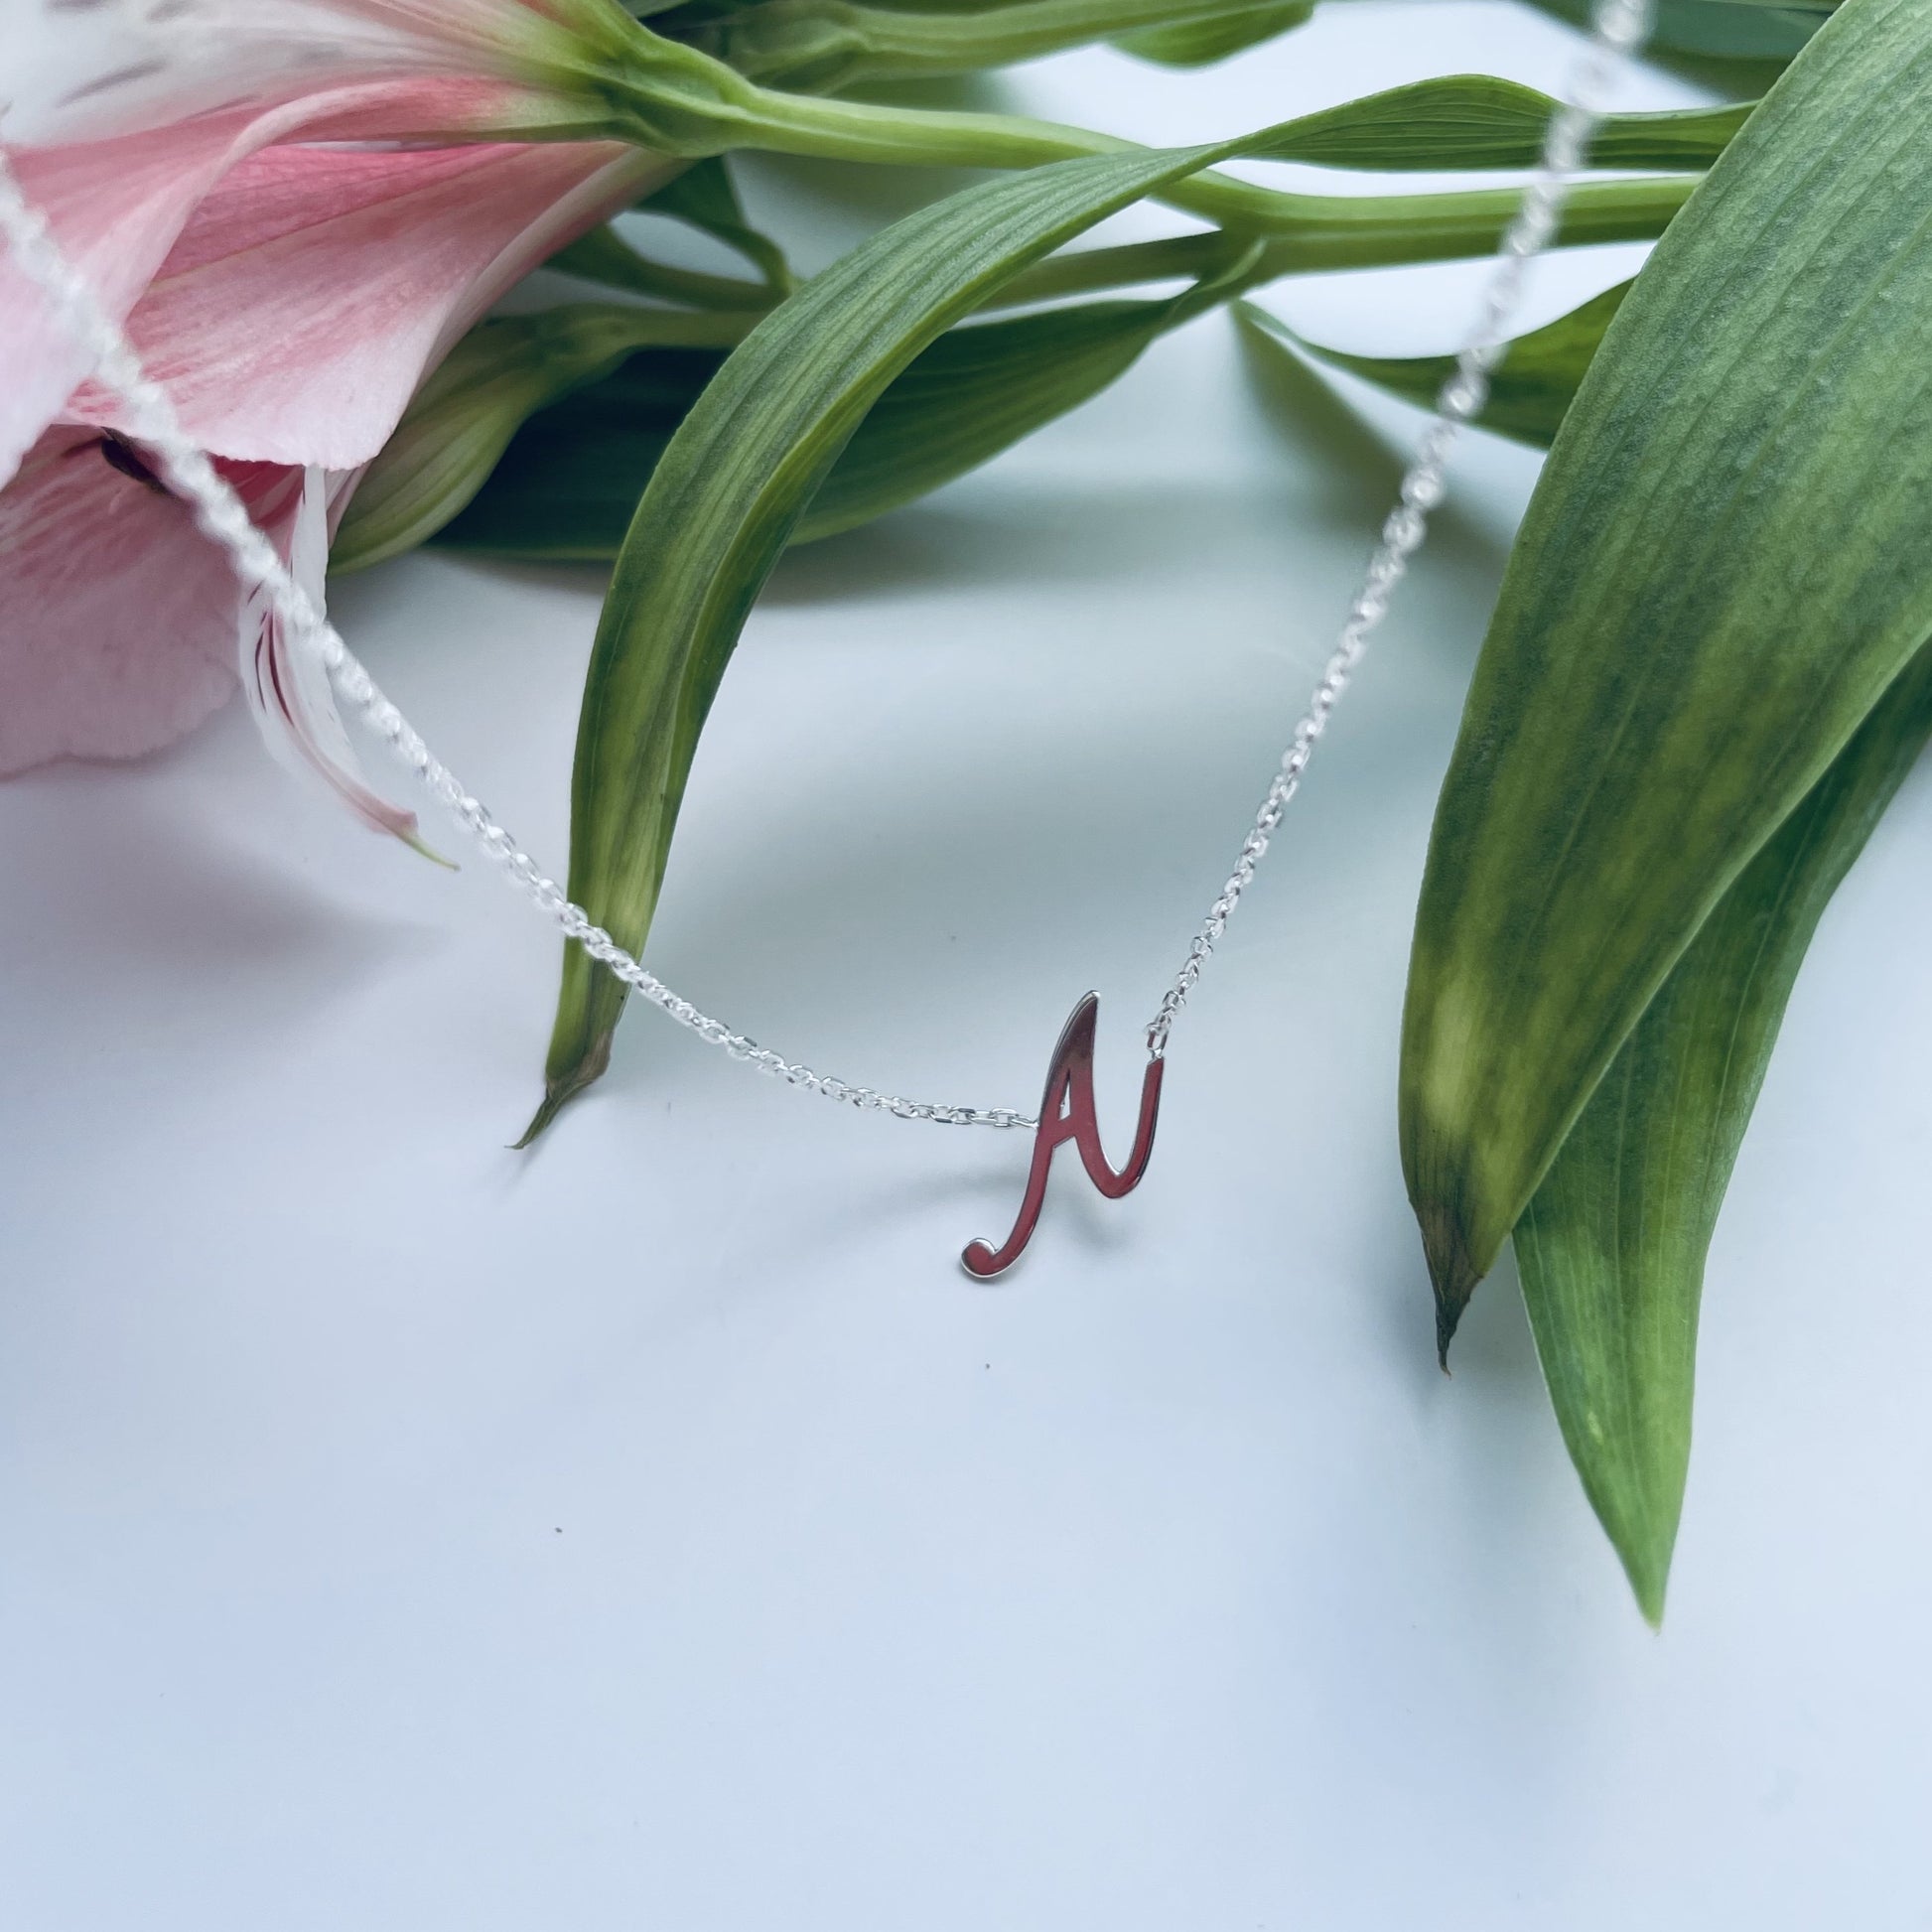 MY SMALL INITIAL necklace - BYVELA jewellery